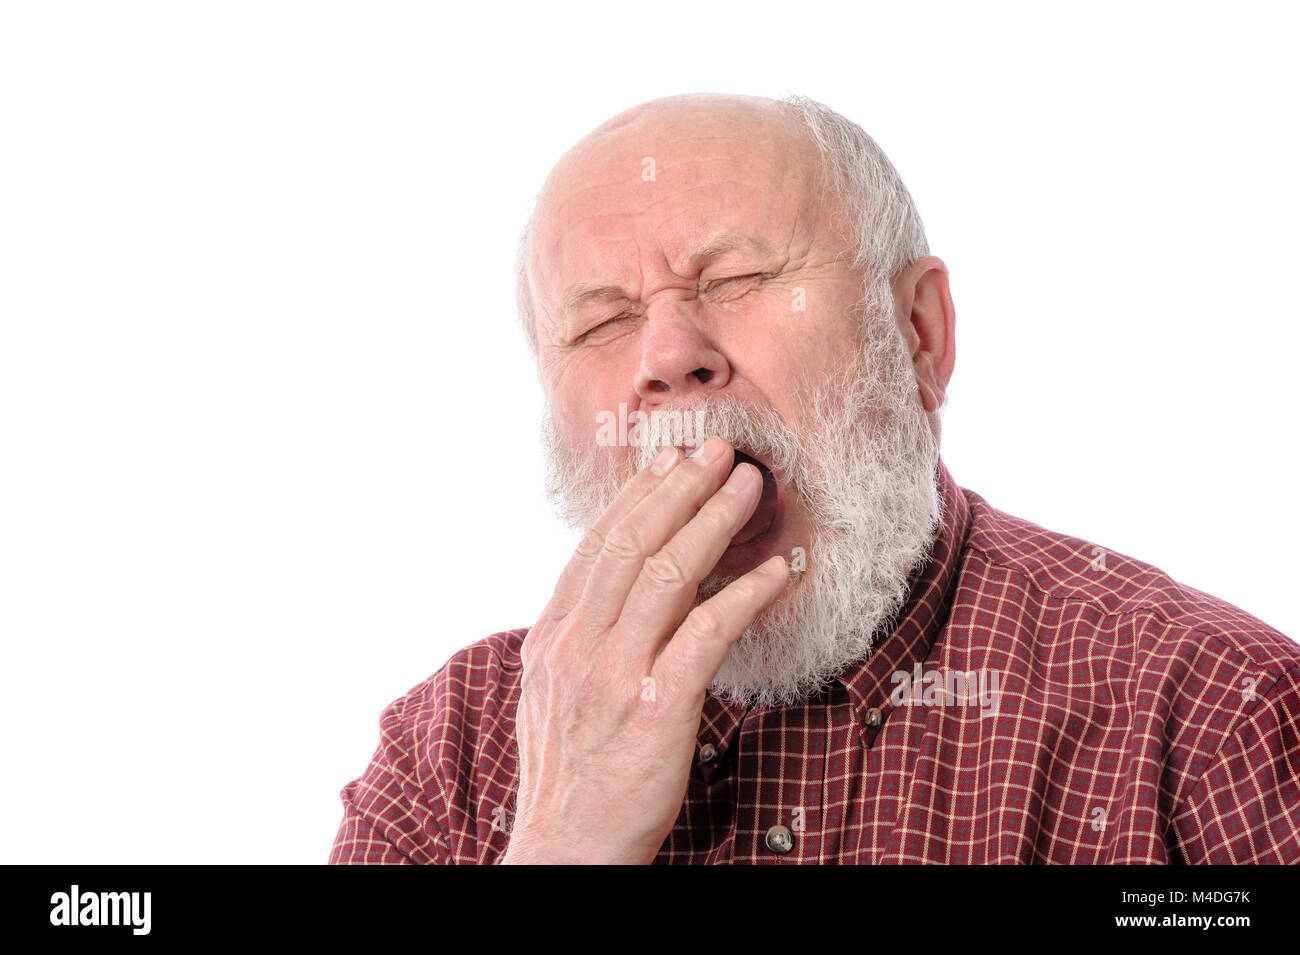 Man yawning, isolated on white Banque D'Images